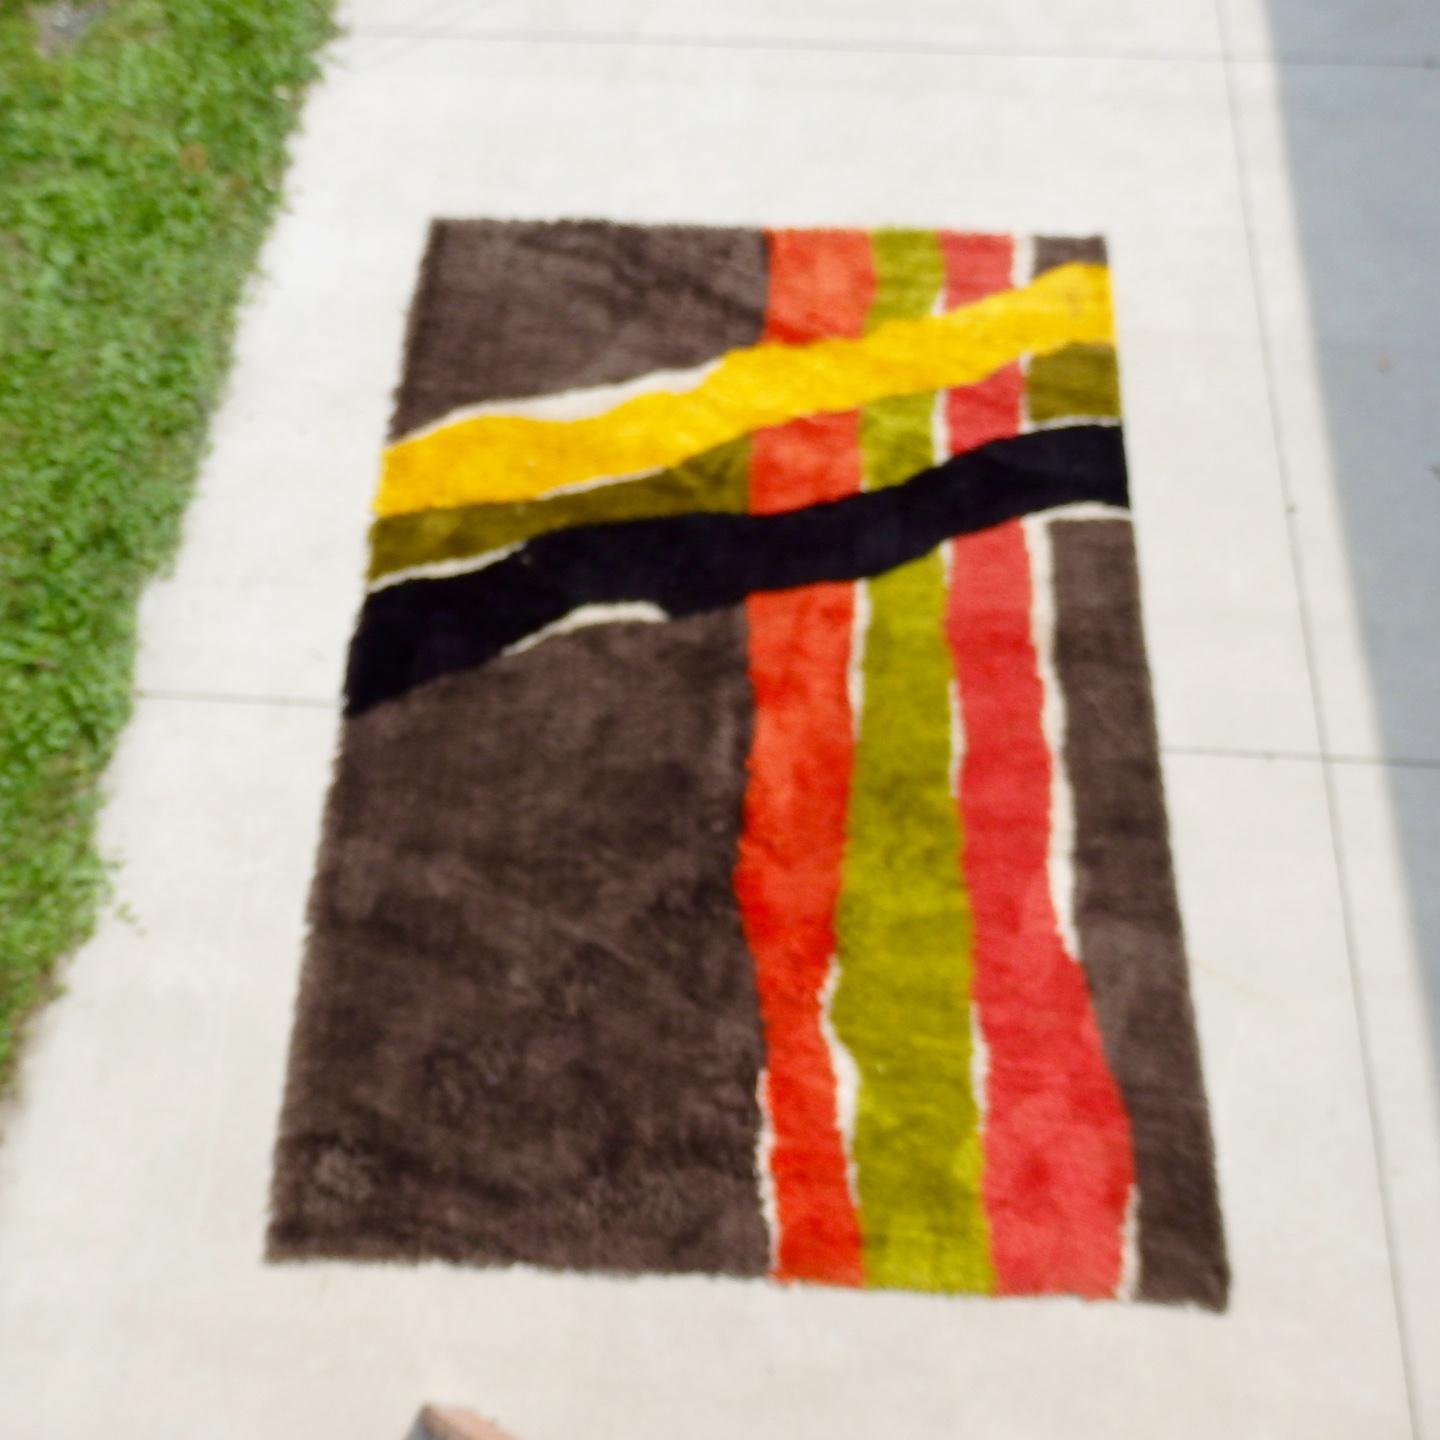 1960s abstract area rug. Excellent original condition. Brown field with orange and green lines intersected by mustard yellow and black.